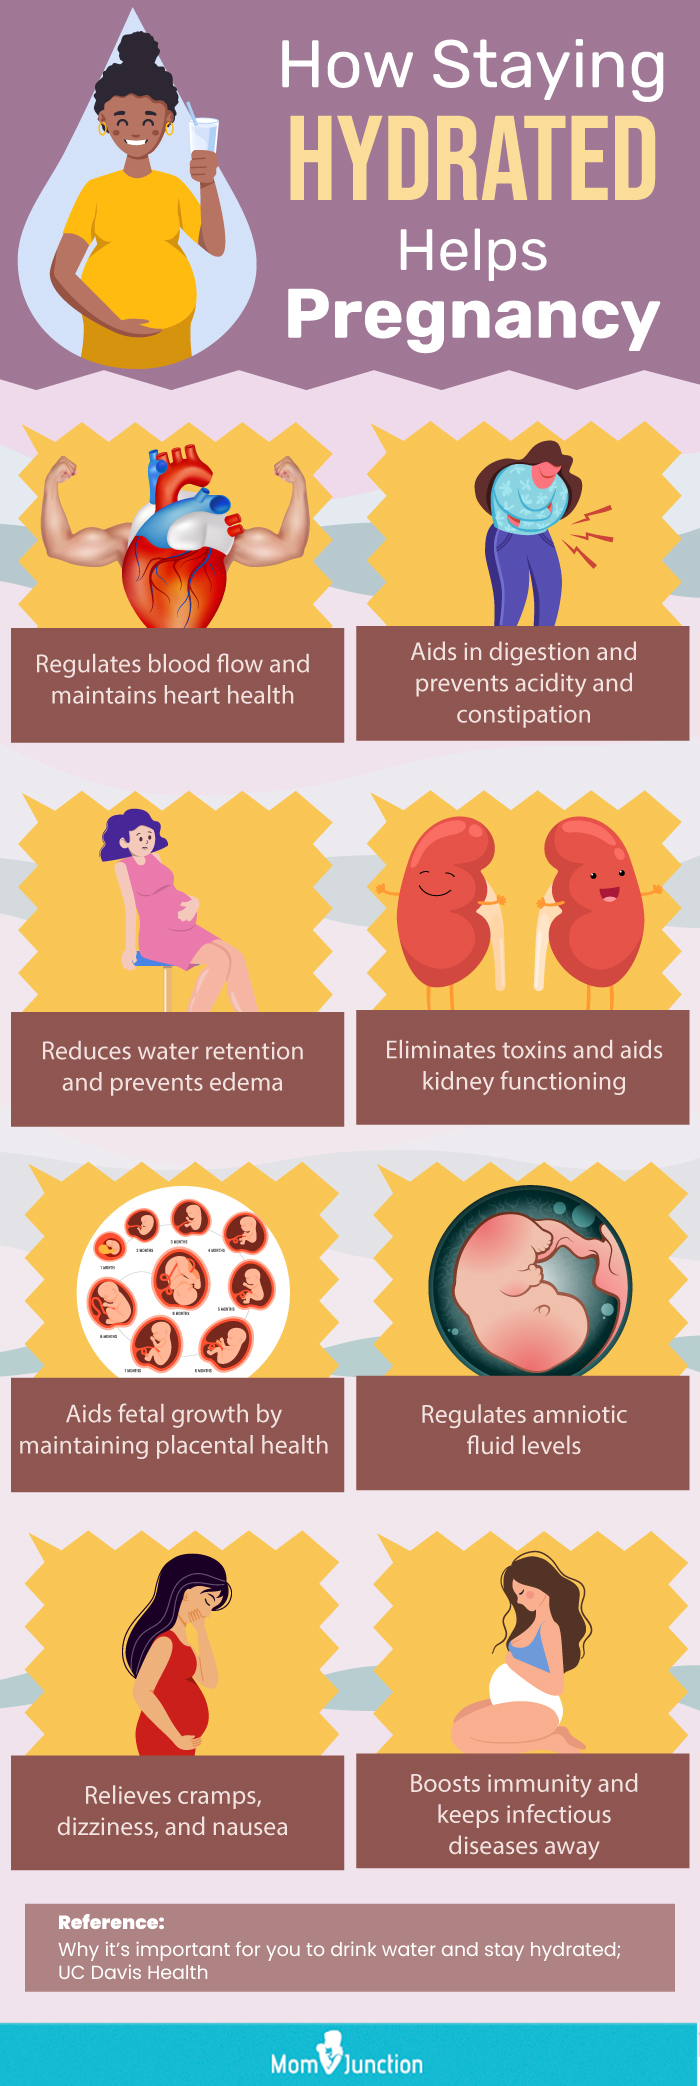 Swimming During Pregnancy: Benefits And Safety Tips